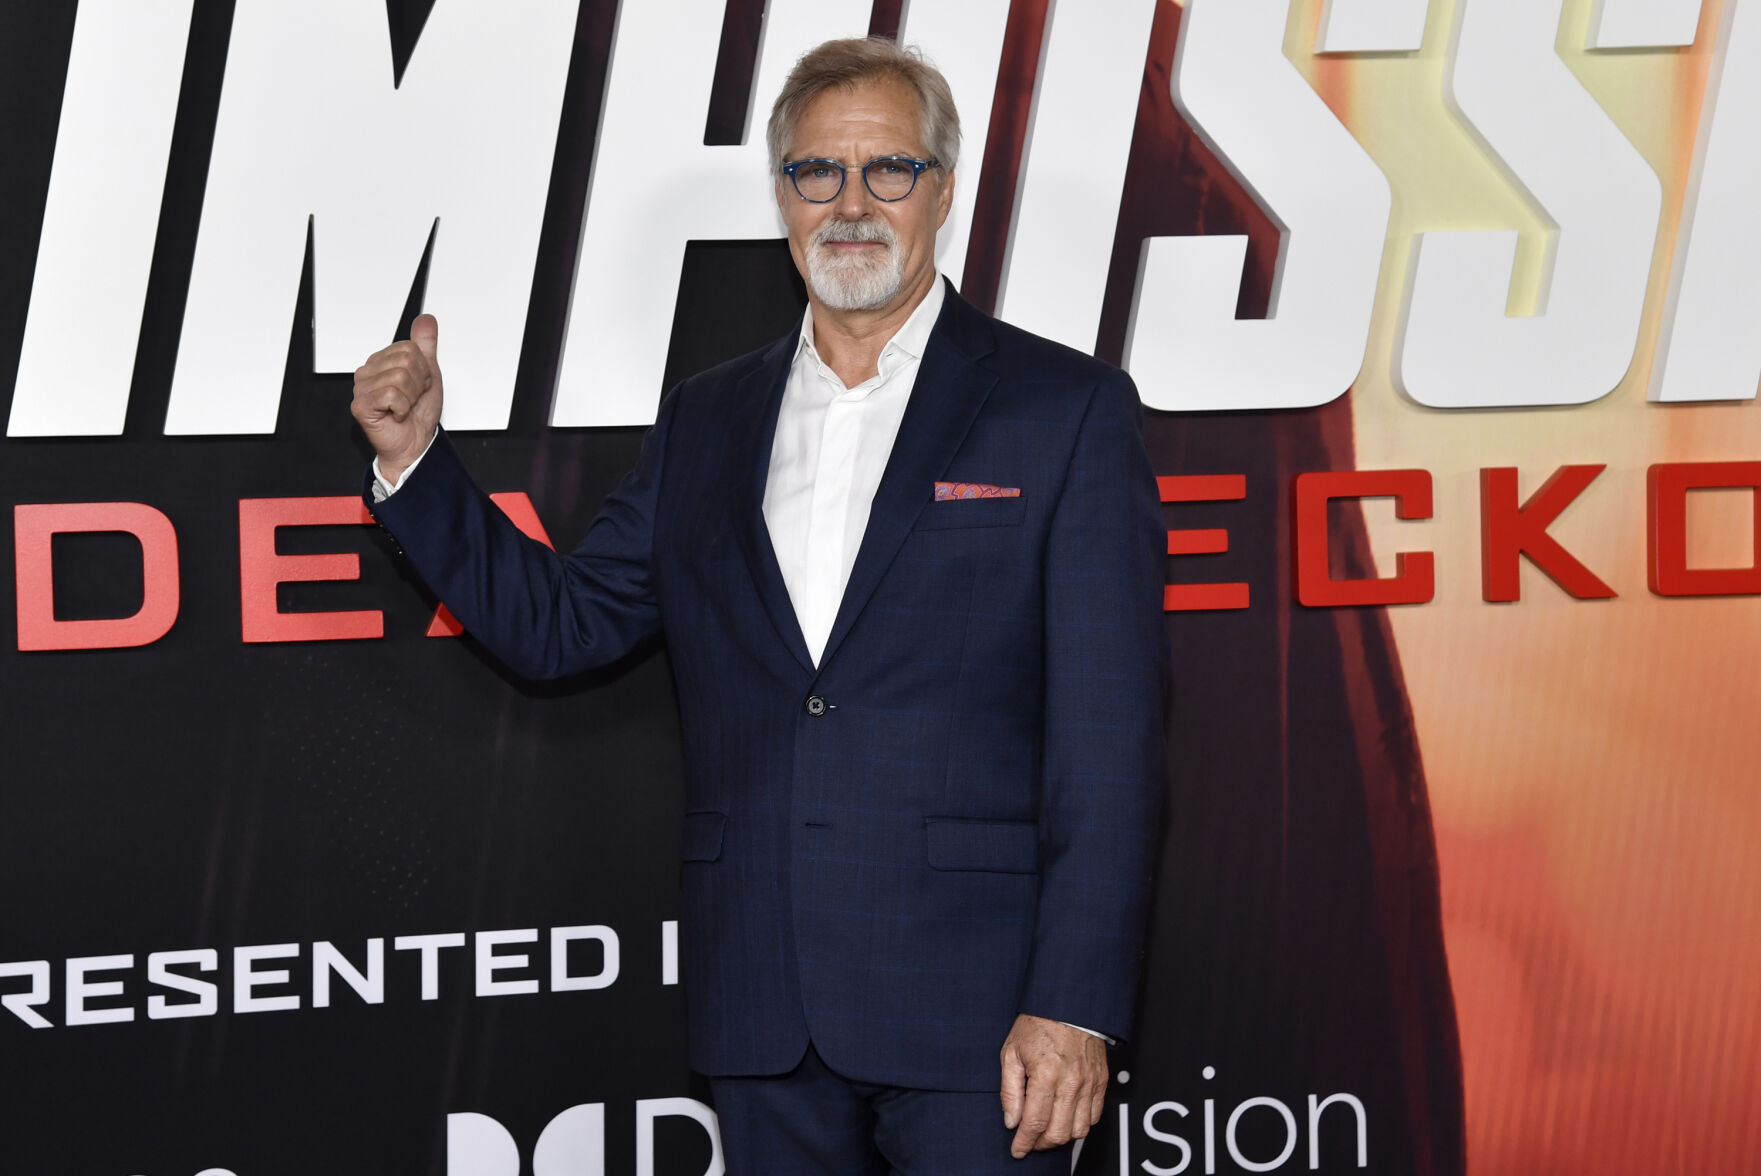 Henry Czerny at the premiere of "Mission: Impossible - Dead Reckoning Part One" held at Rose Theater, at Jazz at Lincoln Center's Frederick P. Rose Hall on July 10, 2023 in New York, New York.